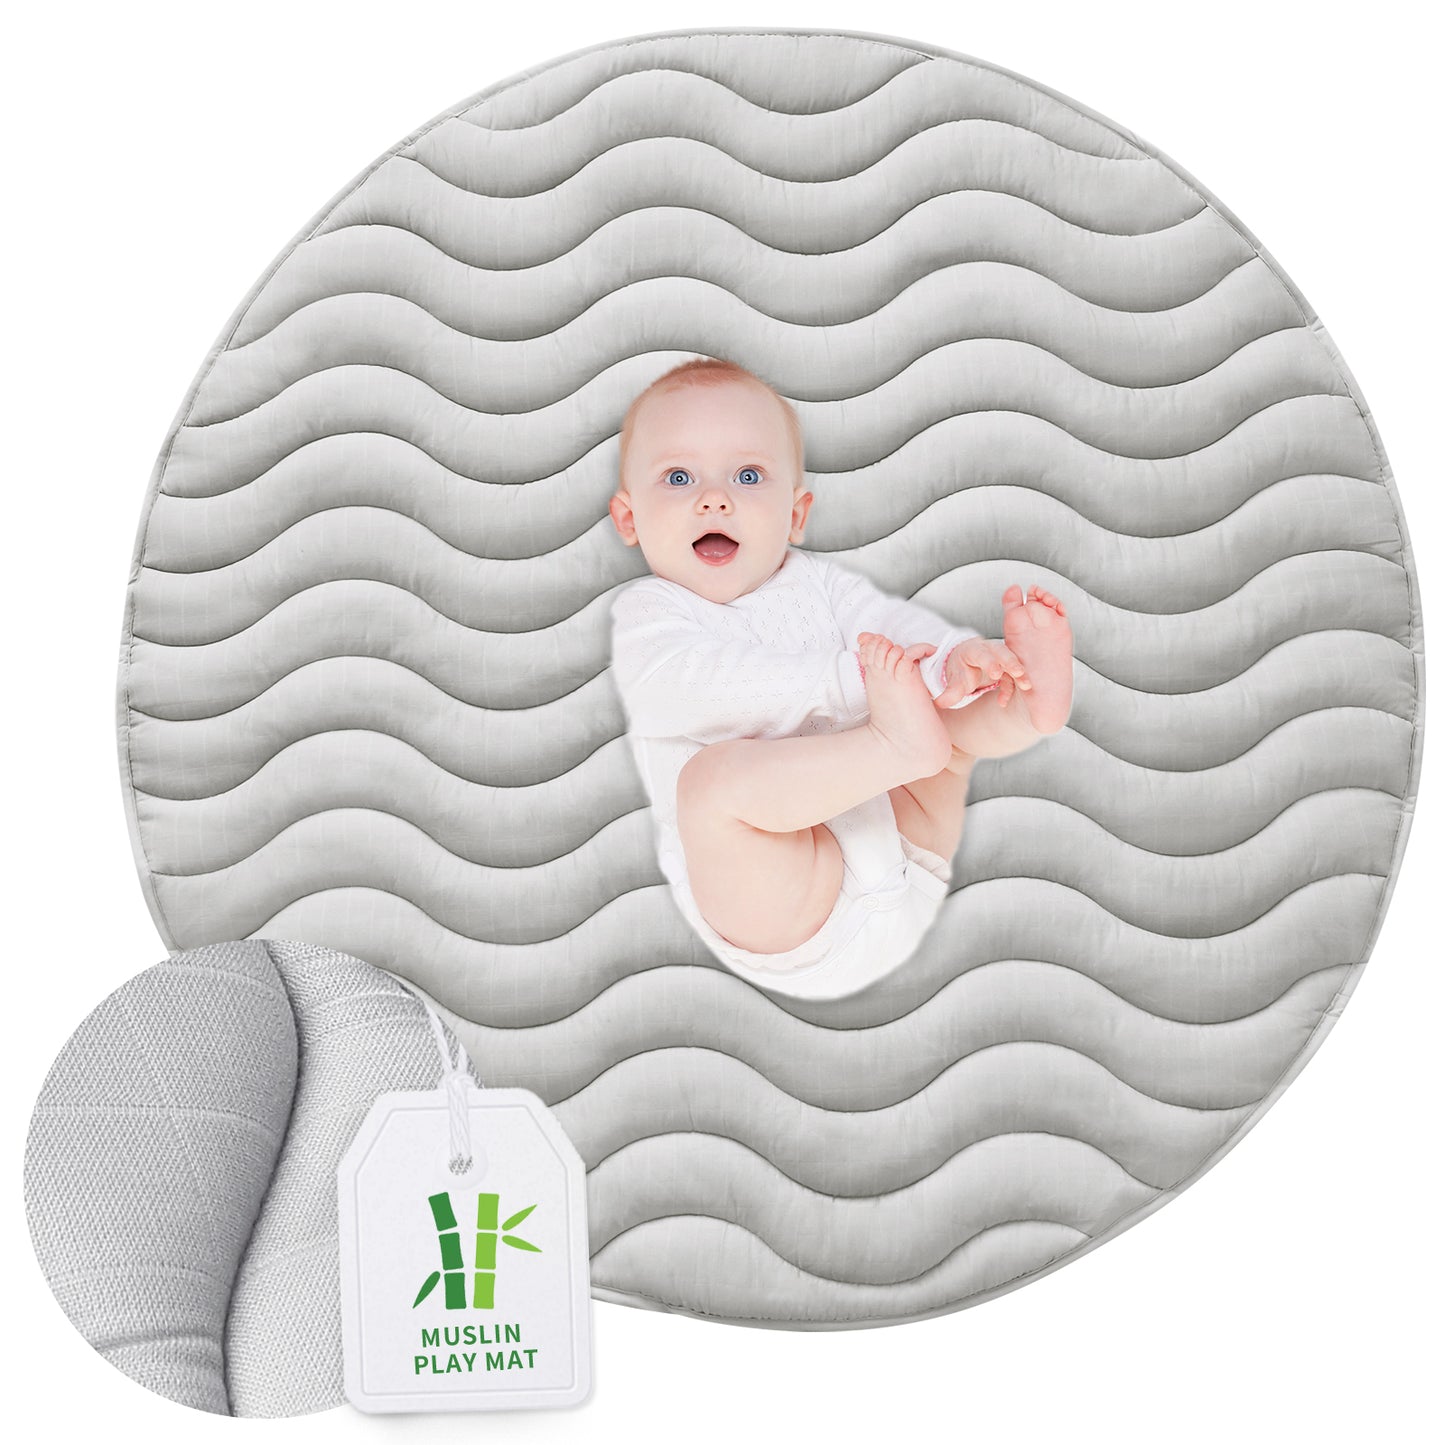 Muslin Baby Play Mat - Round 47'' x 47'', Padded Tummy Time Activity Mat for Infant & Toddler, Intricate Wave Quilted, Grey - Biloban Online Store